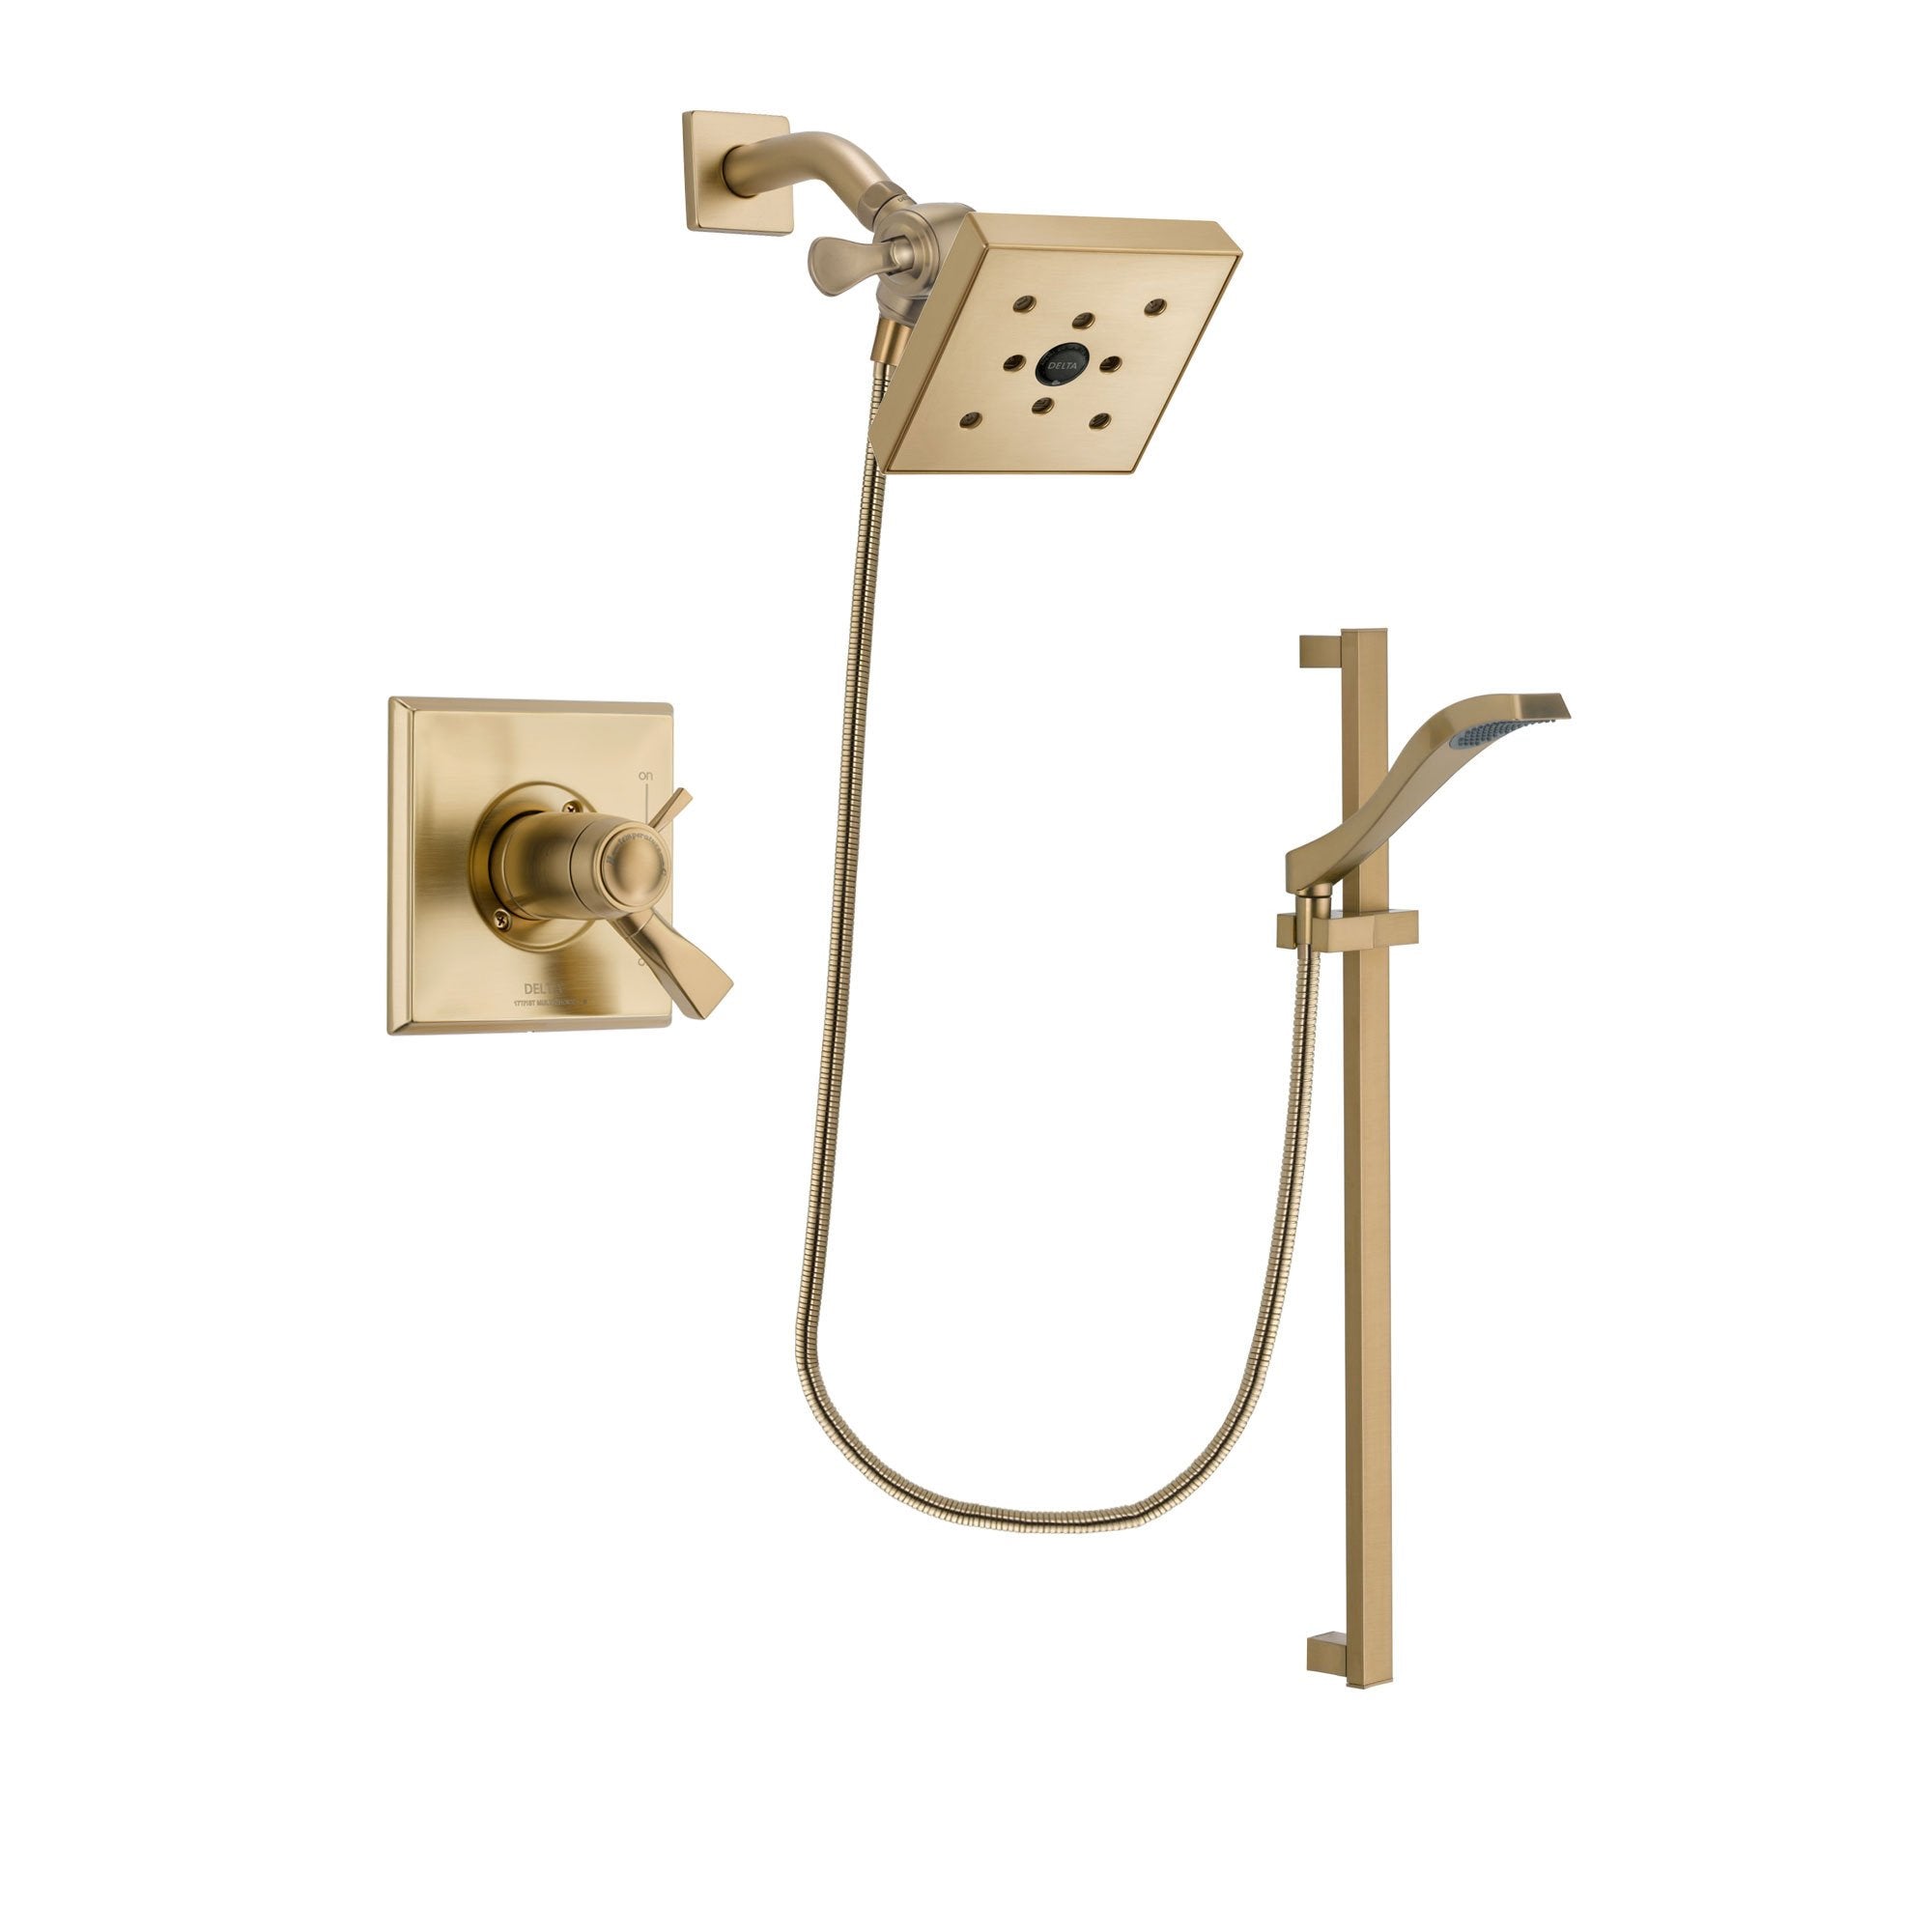 Delta Dryden Champagne Bronze Finish Thermostatic Shower Faucet System Package with Square Shower Head and Modern Handheld Shower Spray with Slide Bar Includes Rough-in Valve DSP3934V